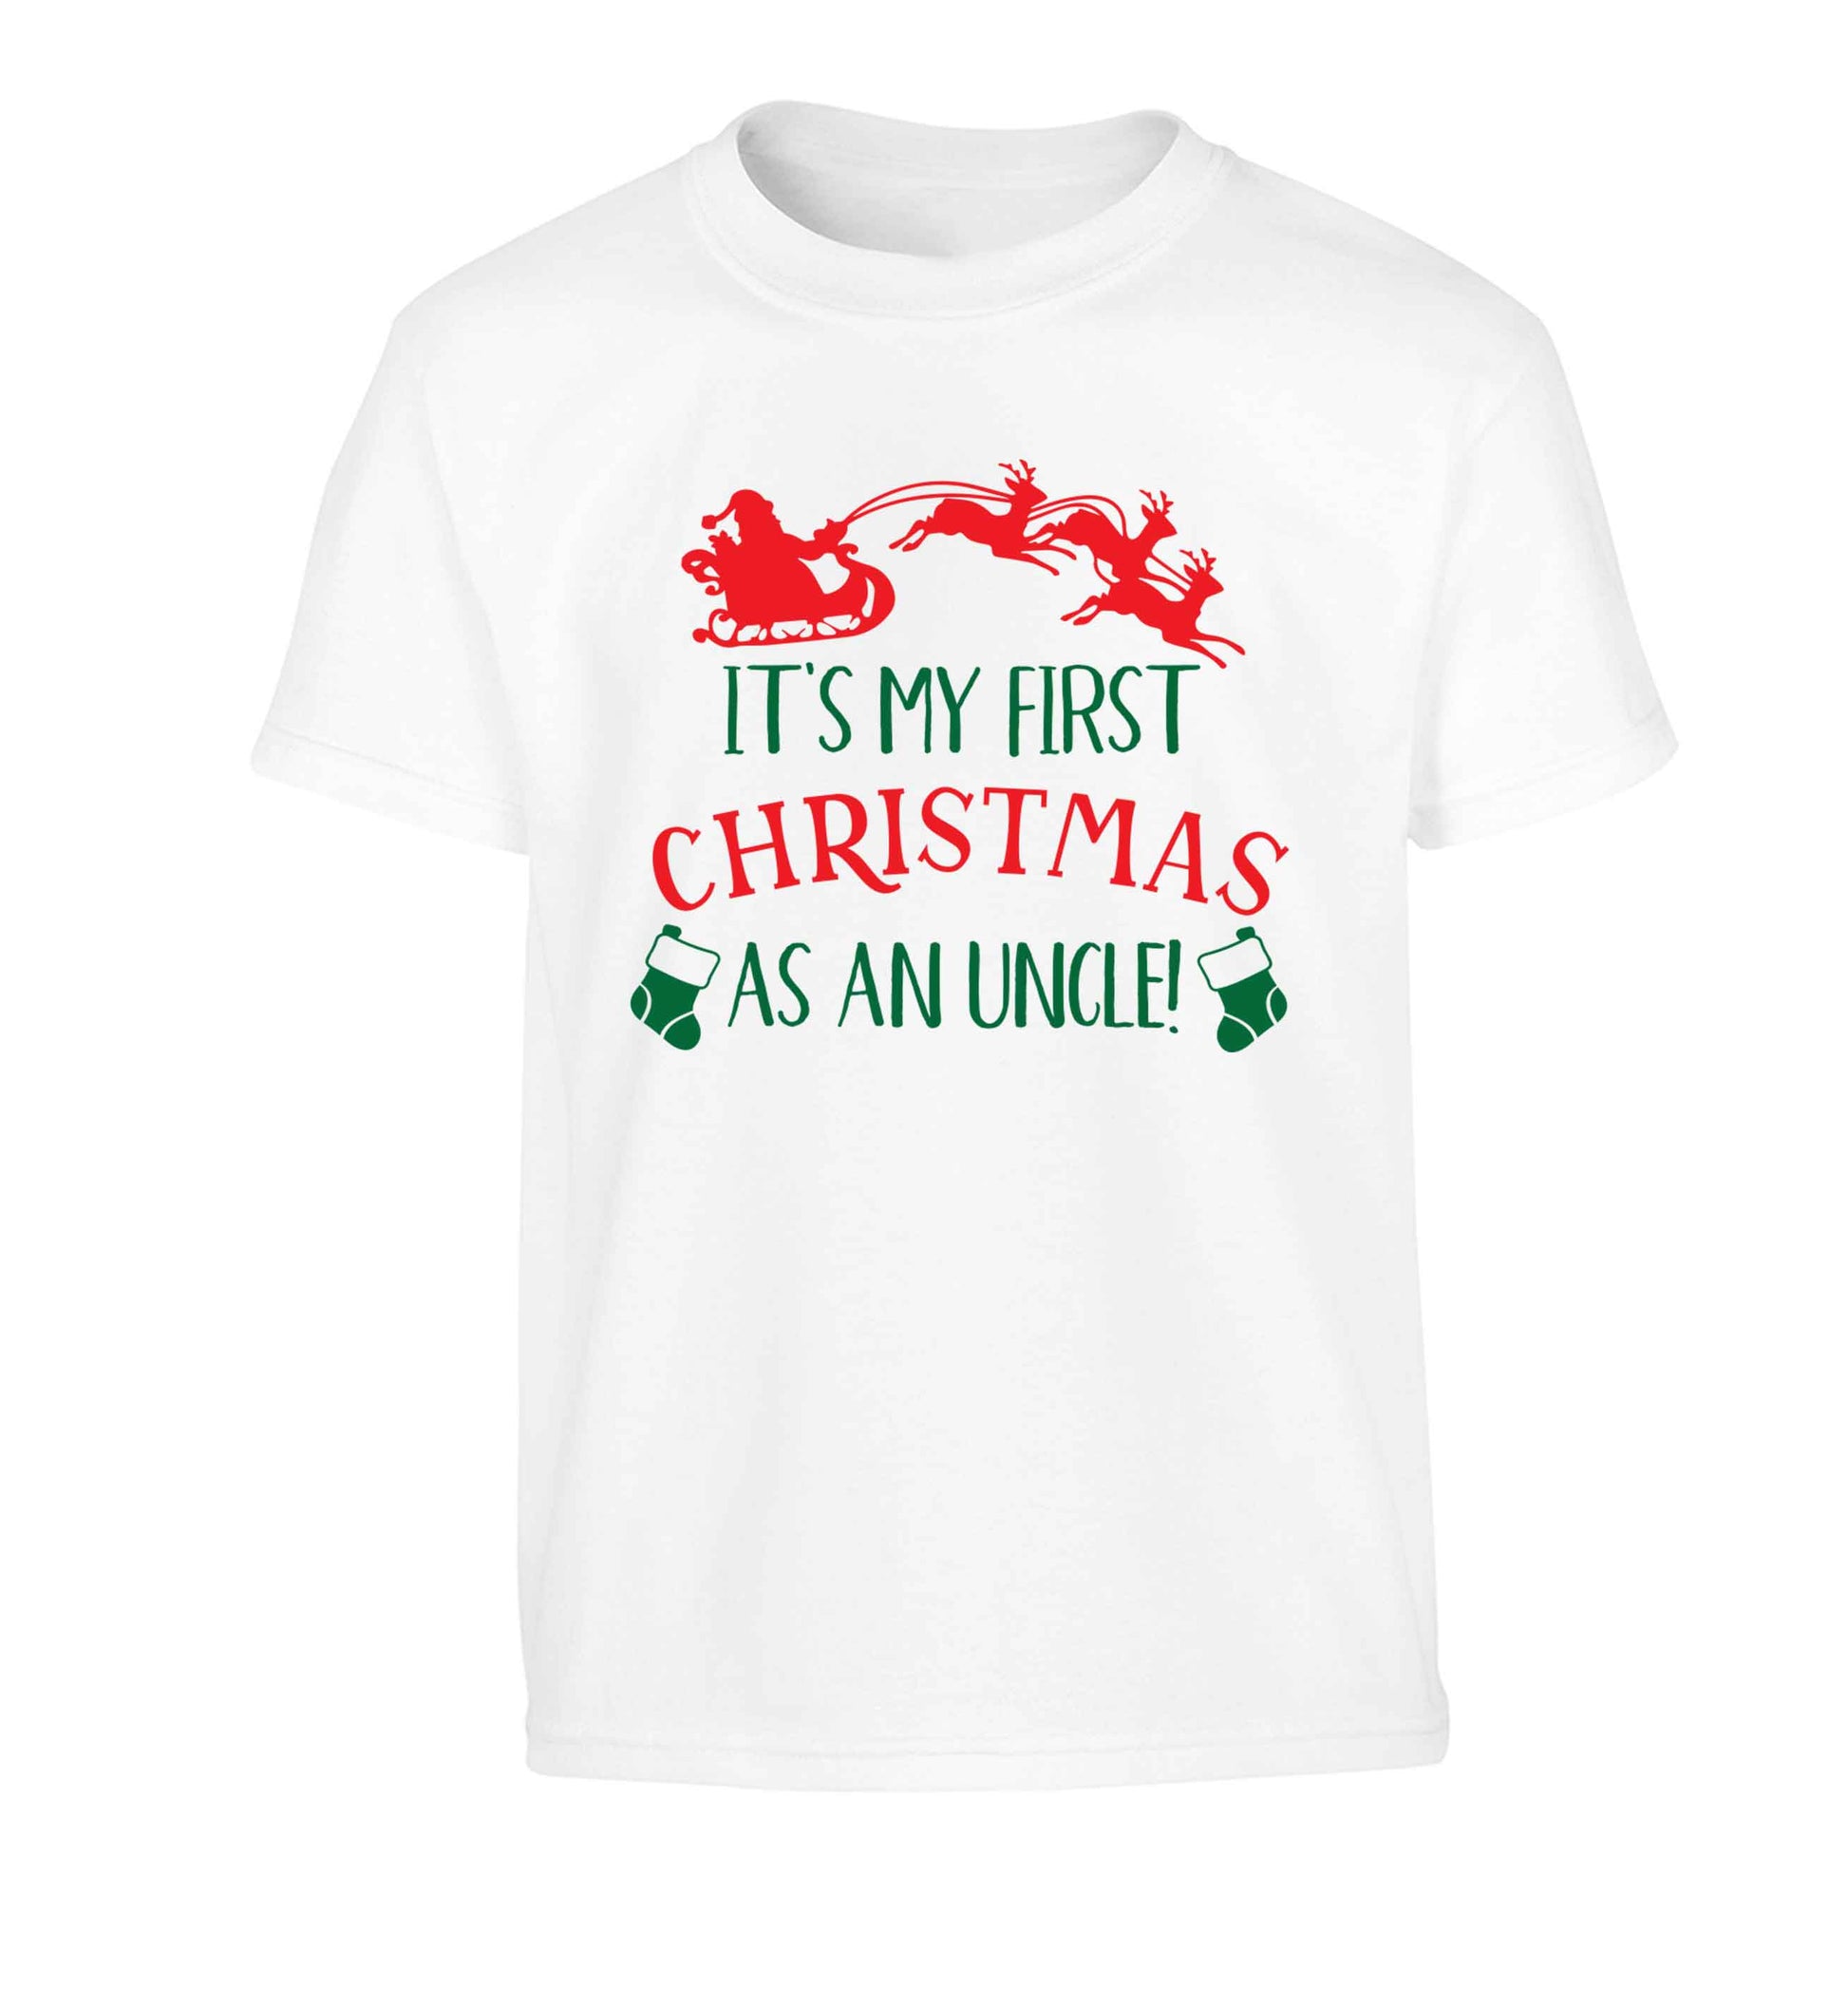 It's my first Christmas as an uncle! Children's white Tshirt 12-13 Years